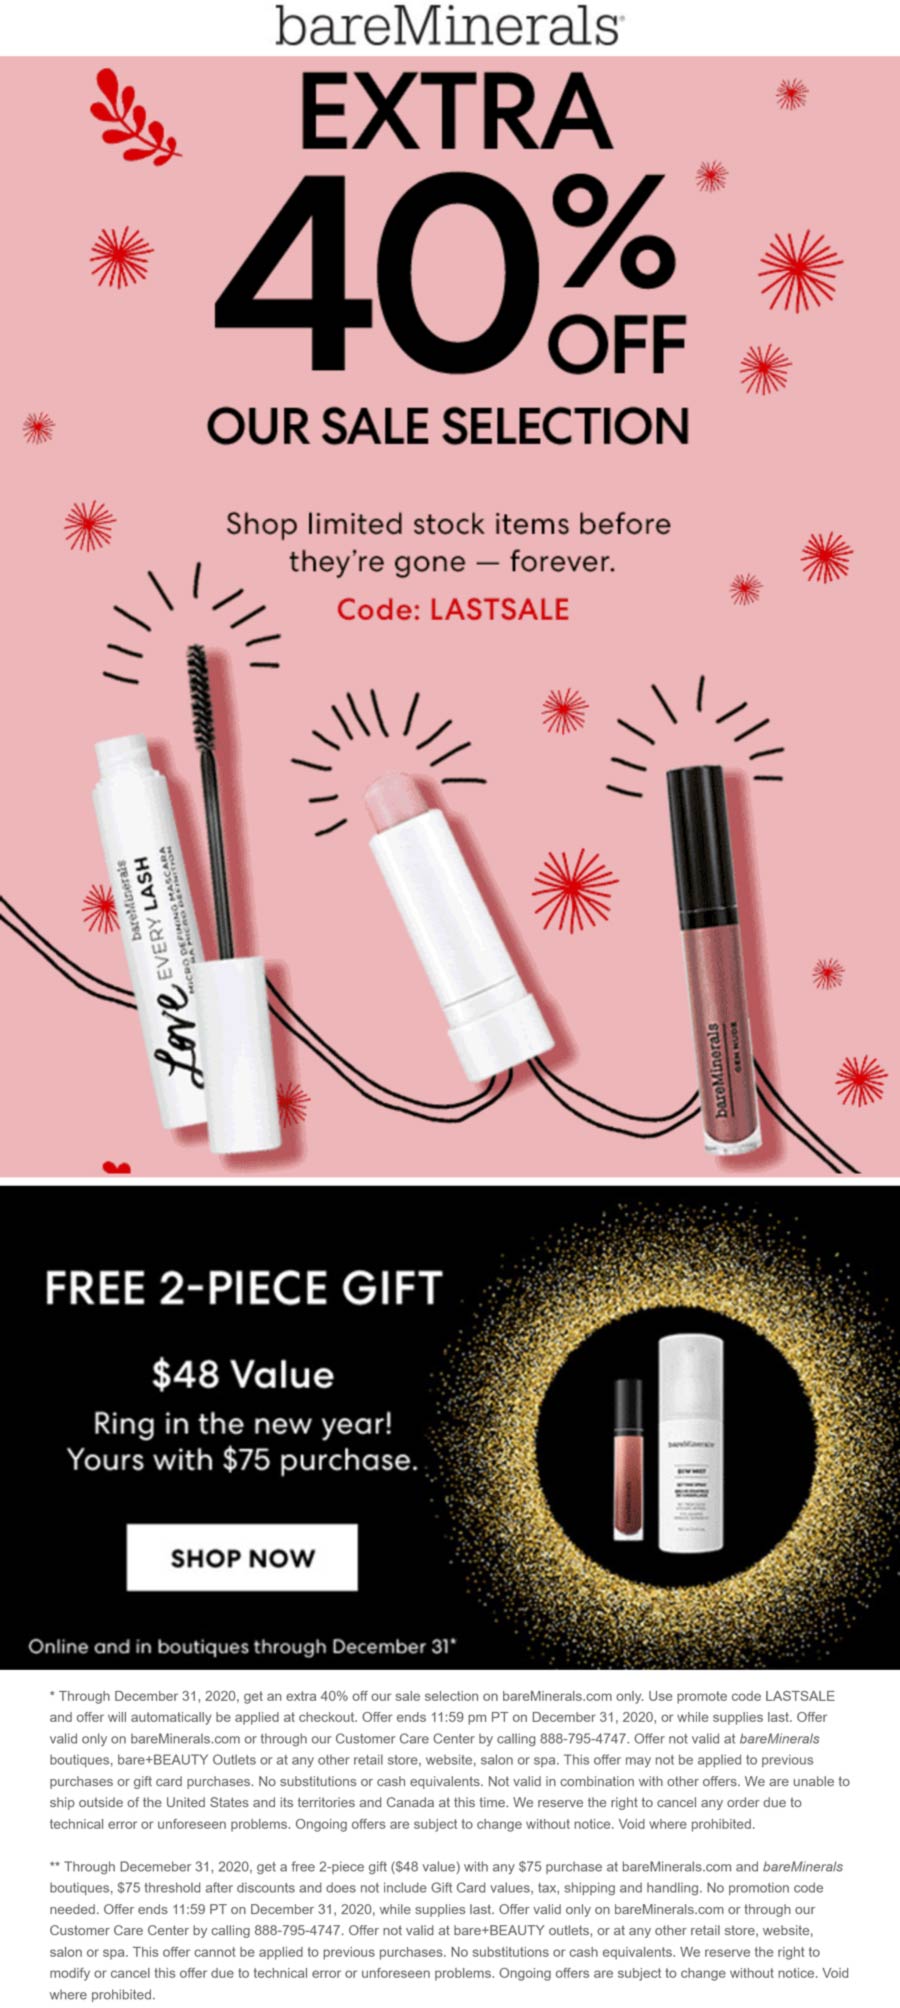 Extra 40 off sale items today at bareMinerals via promo code LASTSALE